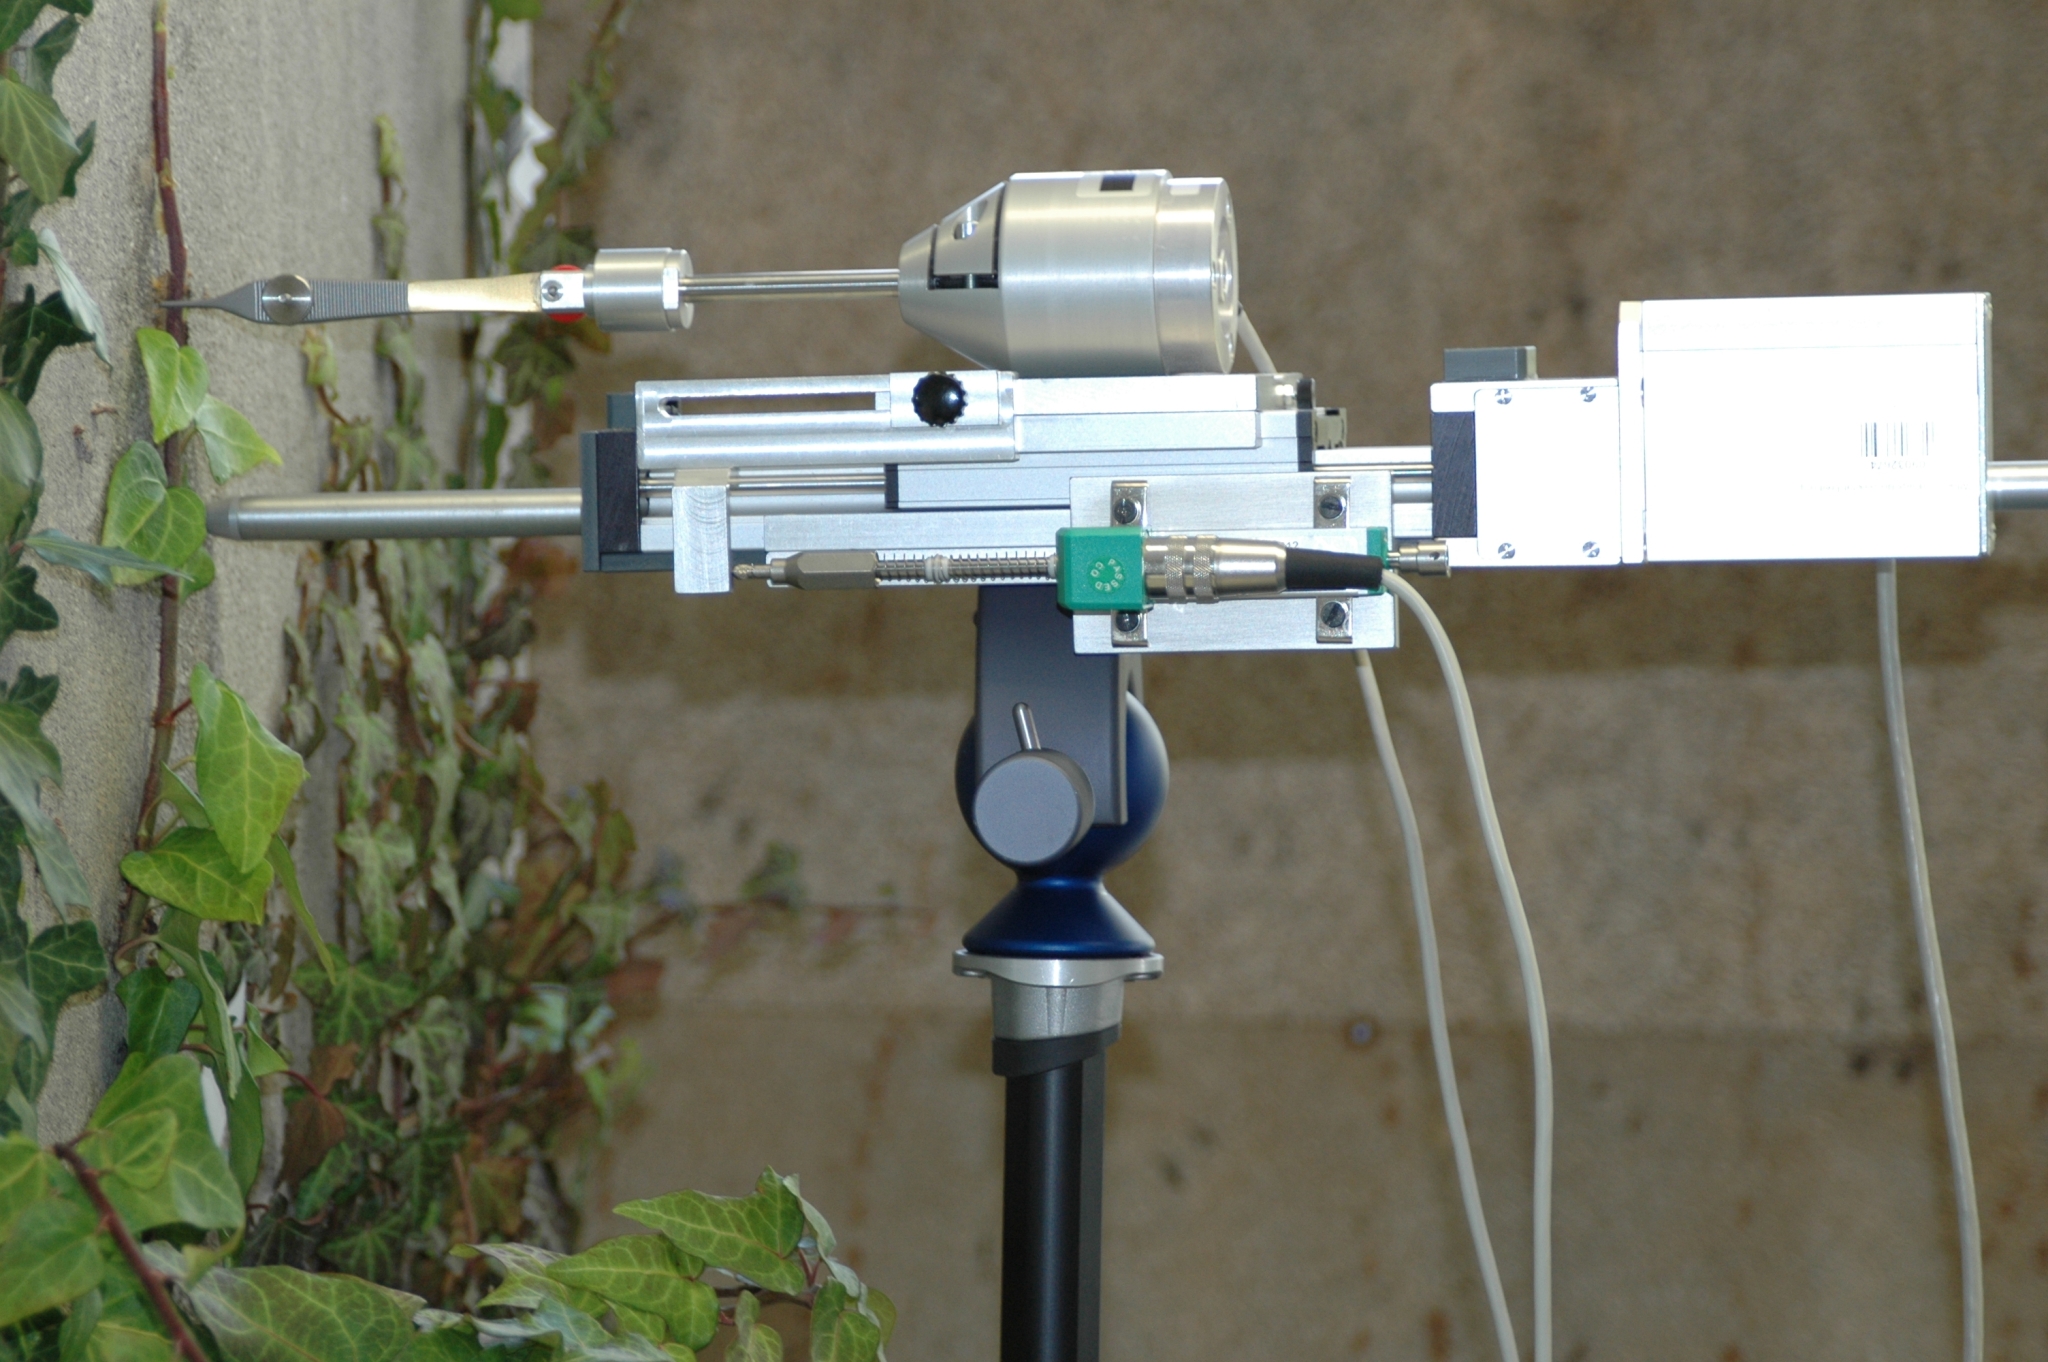 The photo shows an apparatus in front of an ivy-covered wall. The apparatus looks like a camera that is mounted onto a stand.